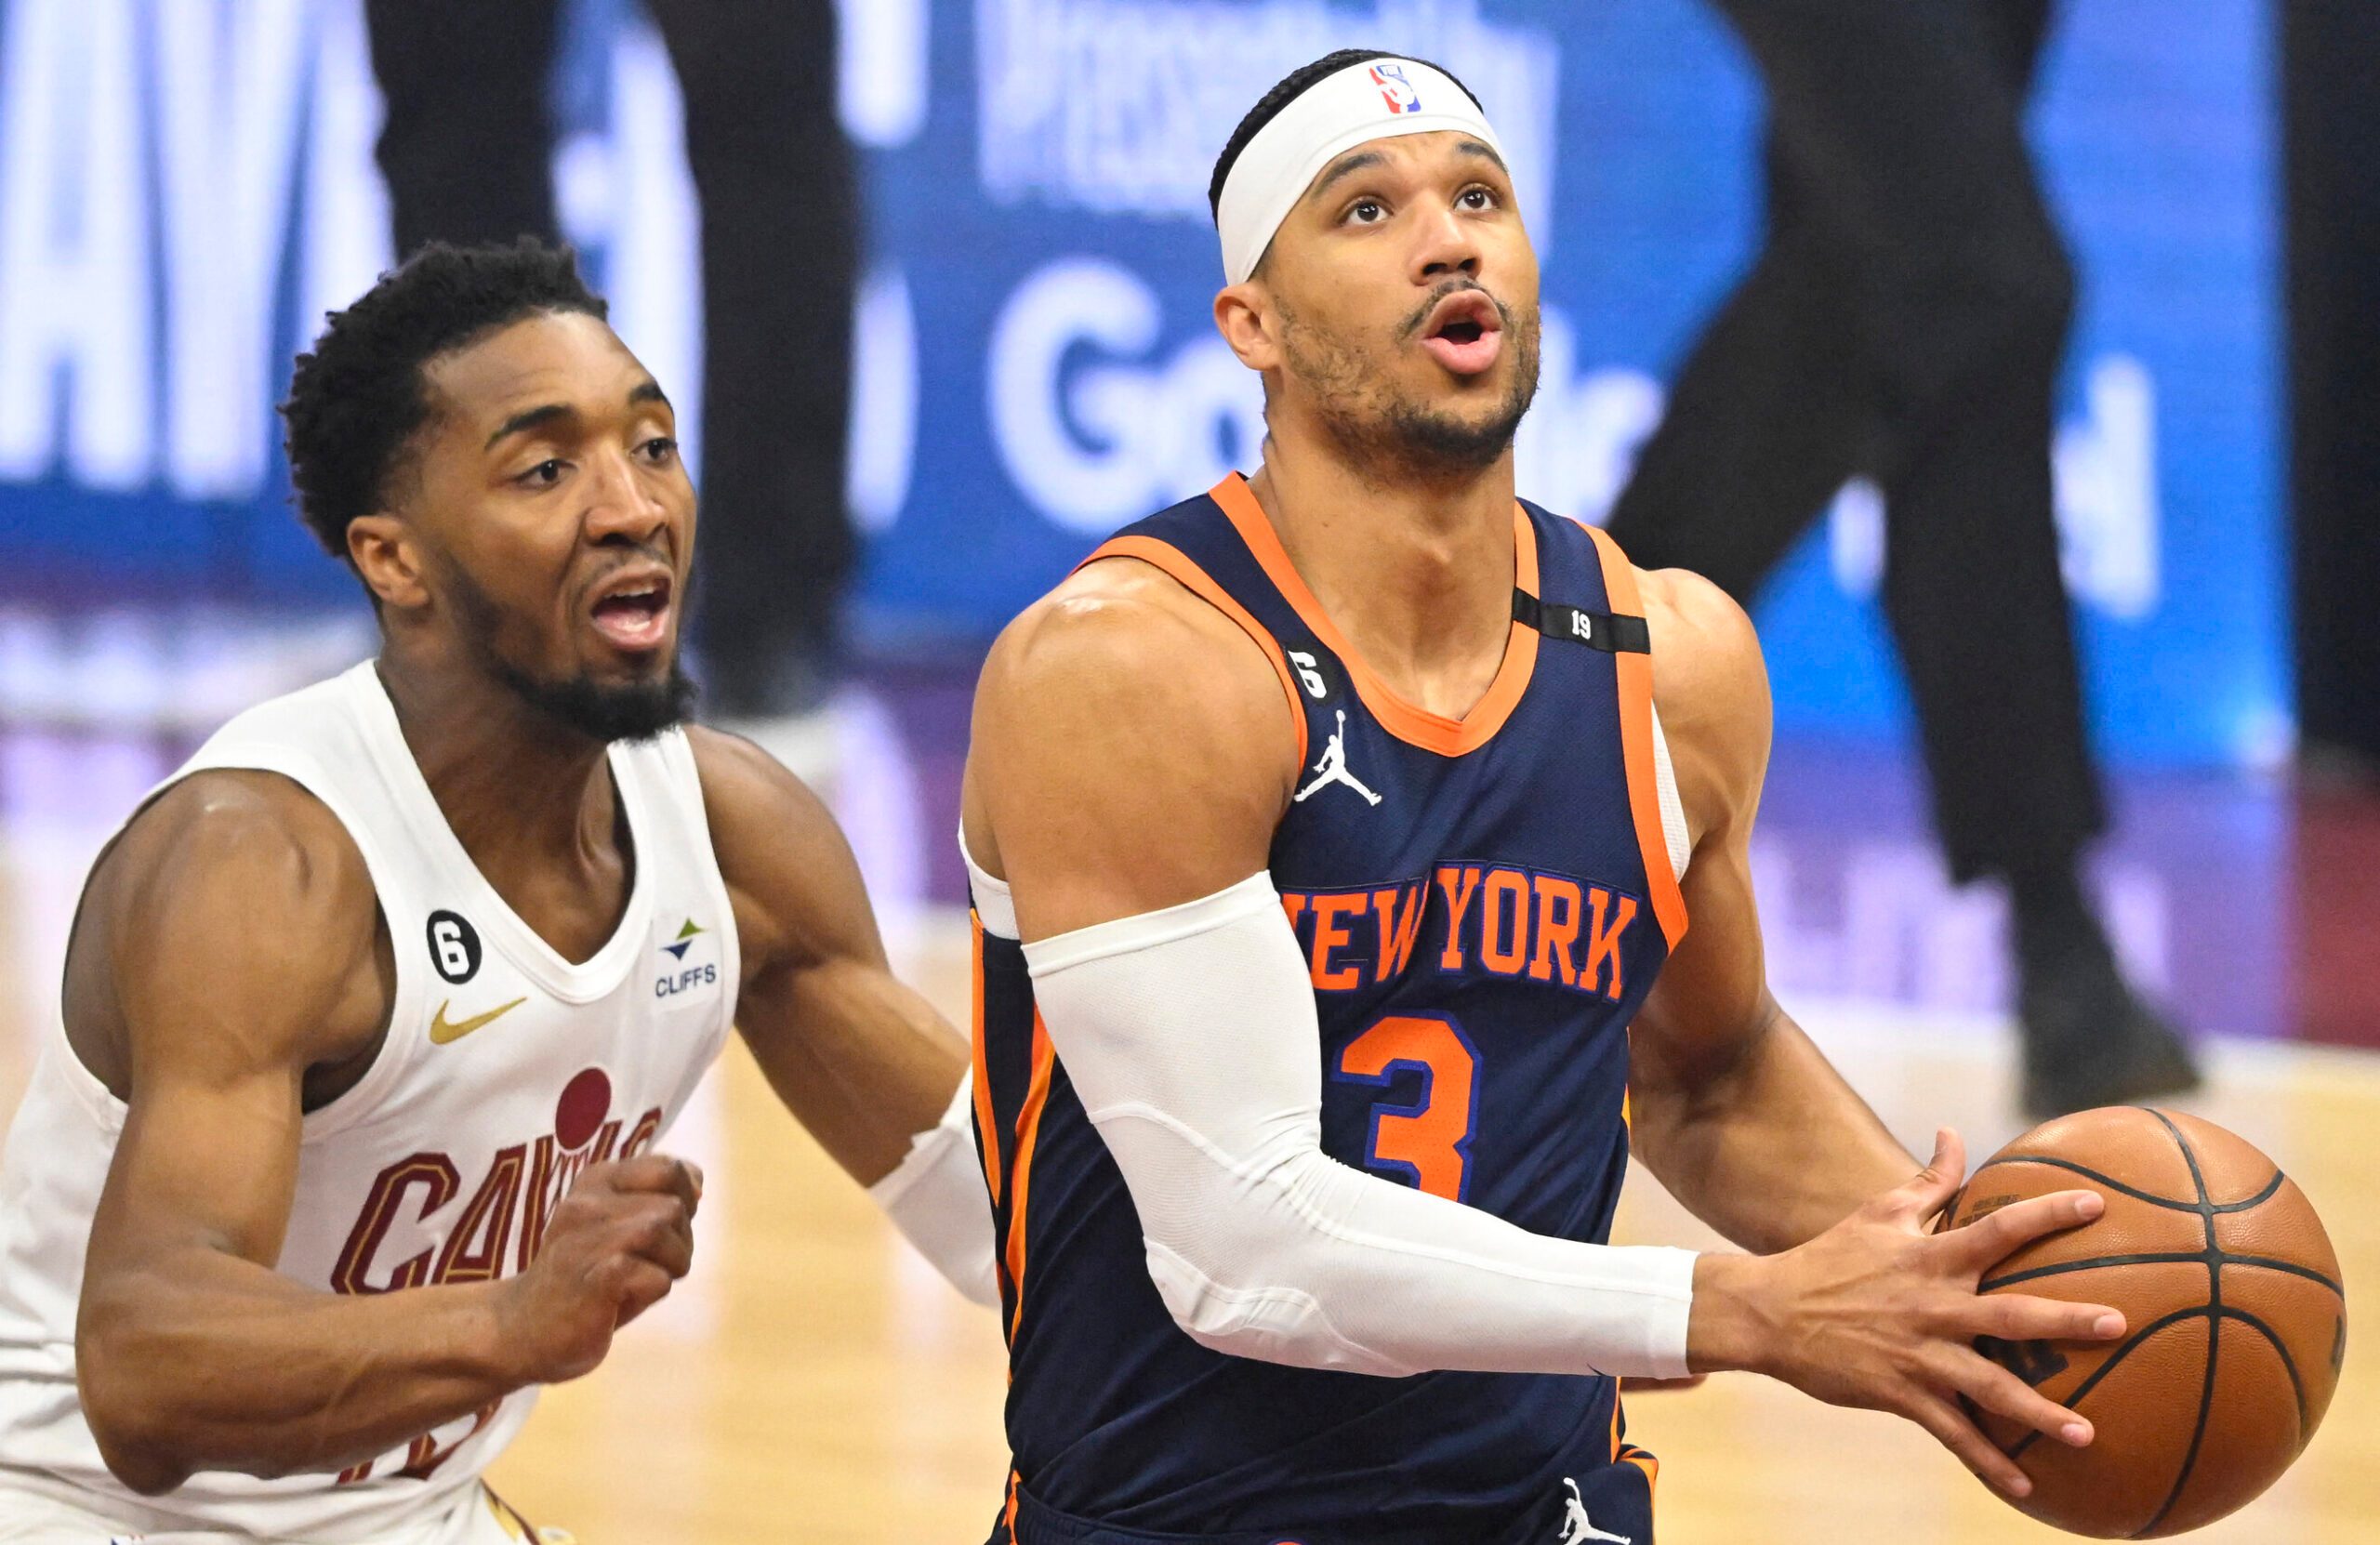 Cavs throttle Knicks to even series at 1-1